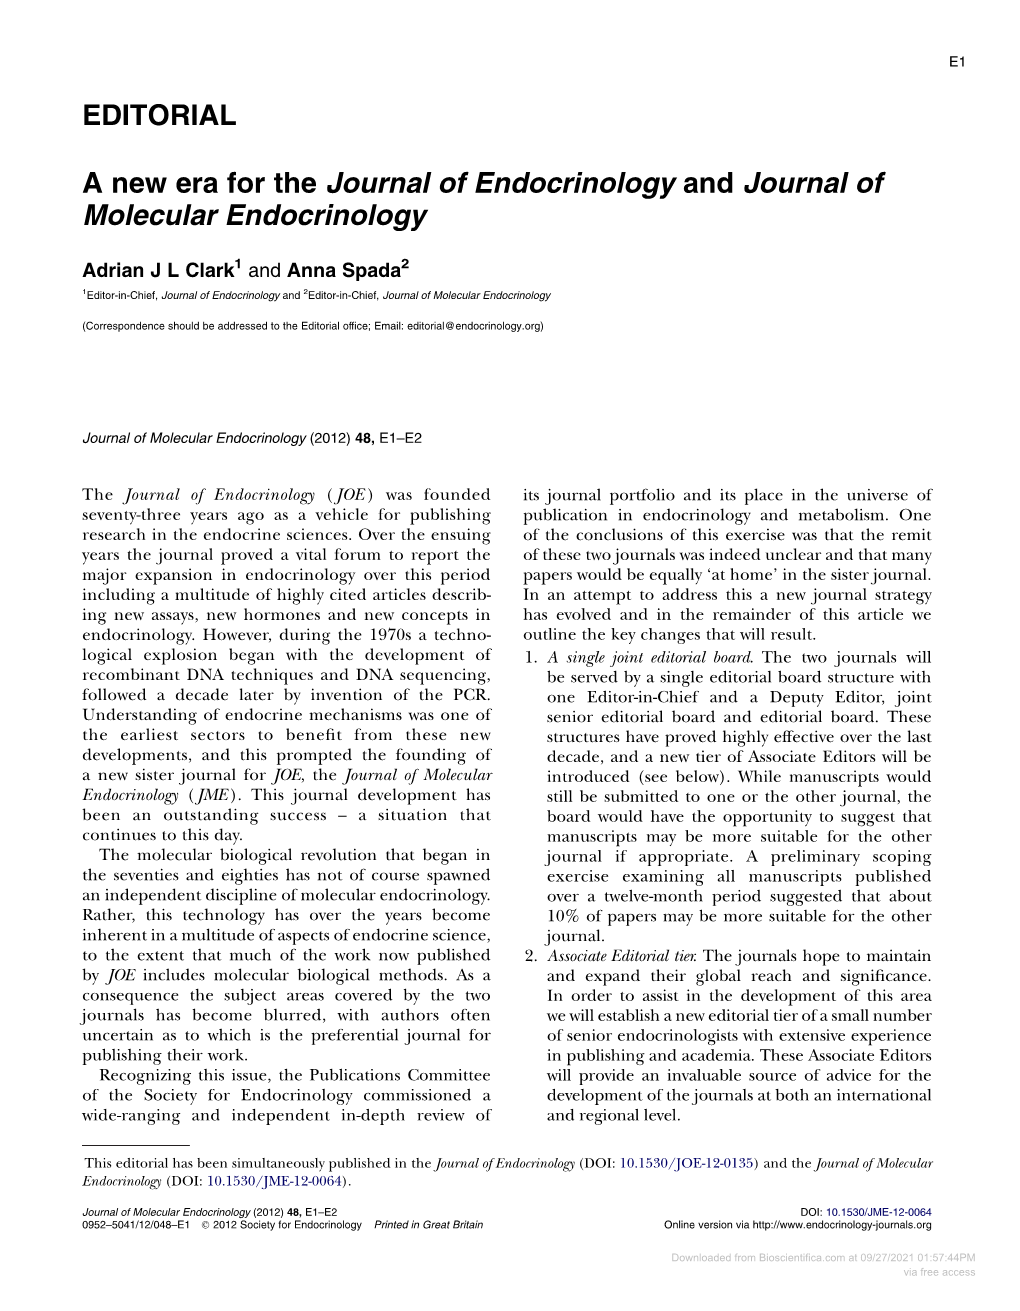 EDITORIAL a New Era for the Journal of Endocrinology and Journal Of